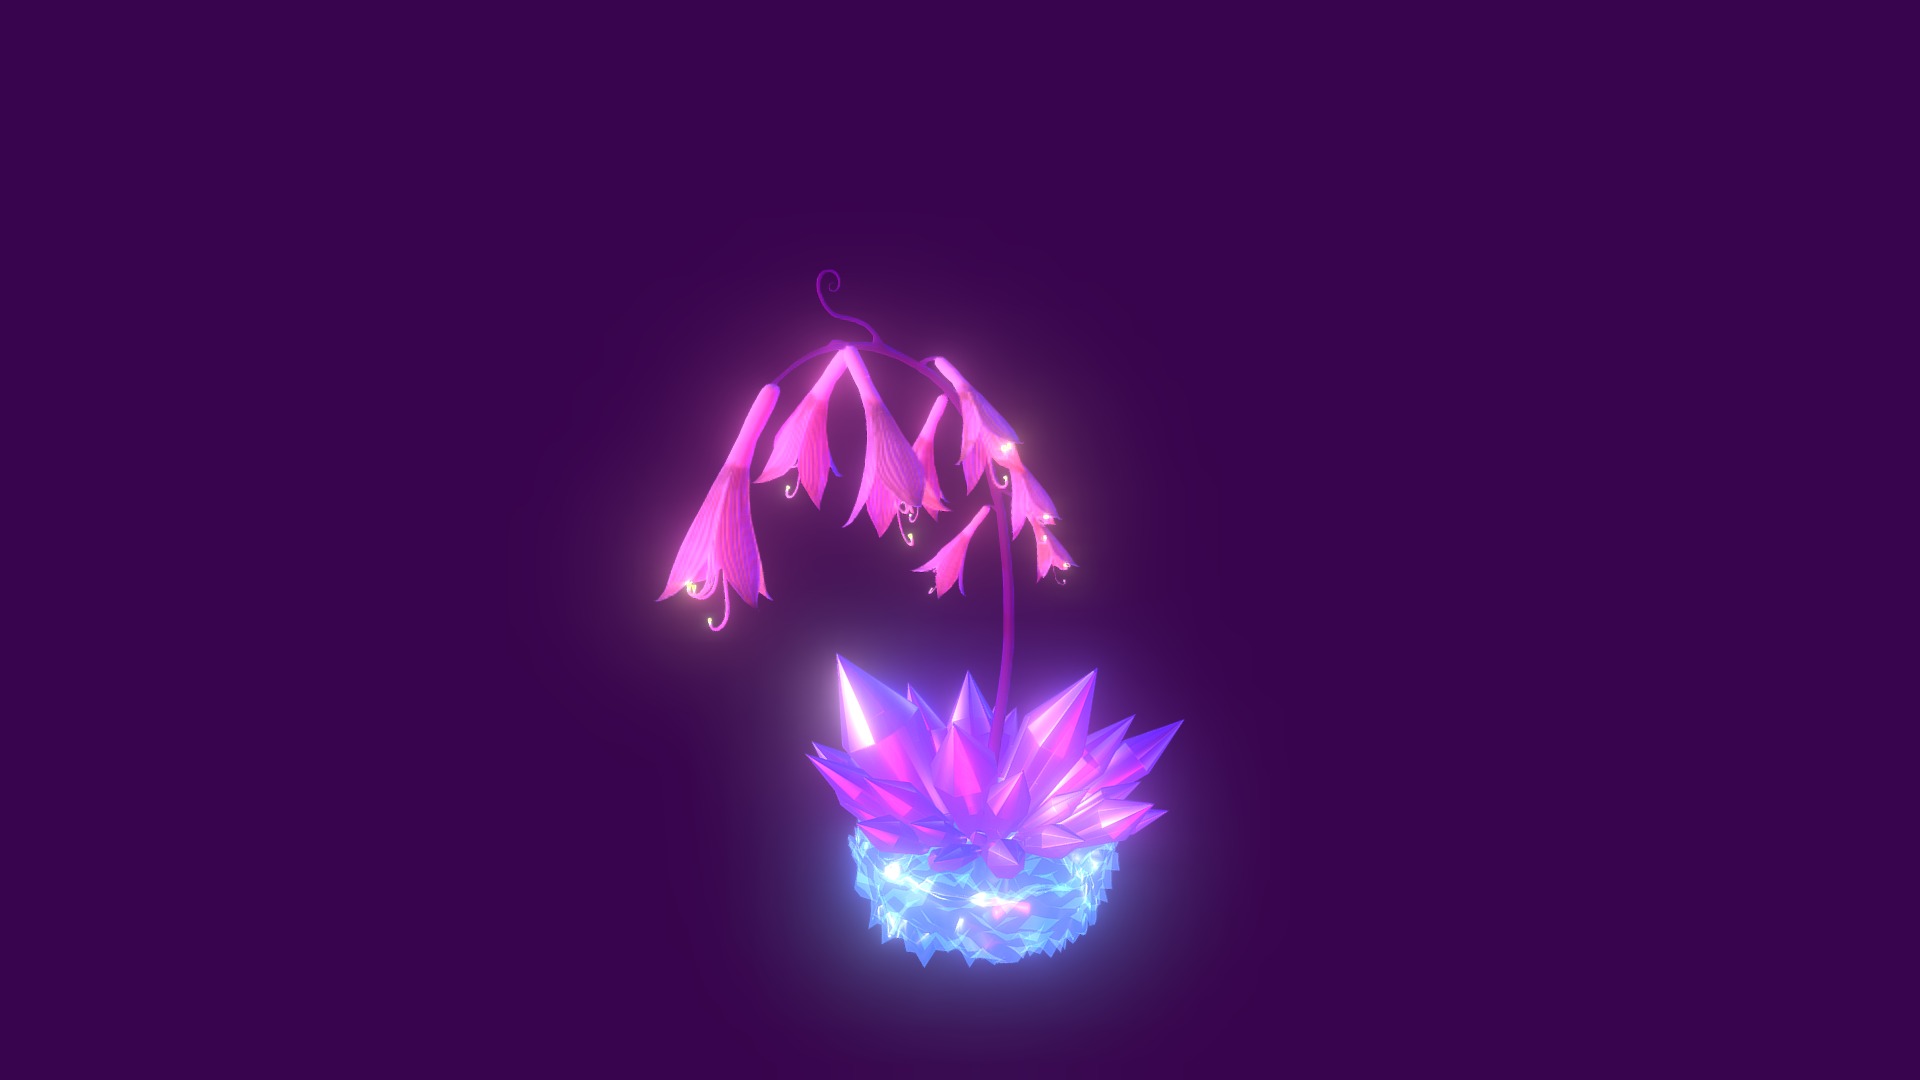 3D model Magical Flower rigged animated - This is a 3D model of the Magical Flower rigged animated. The 3D model is about a couple of glowing objects.